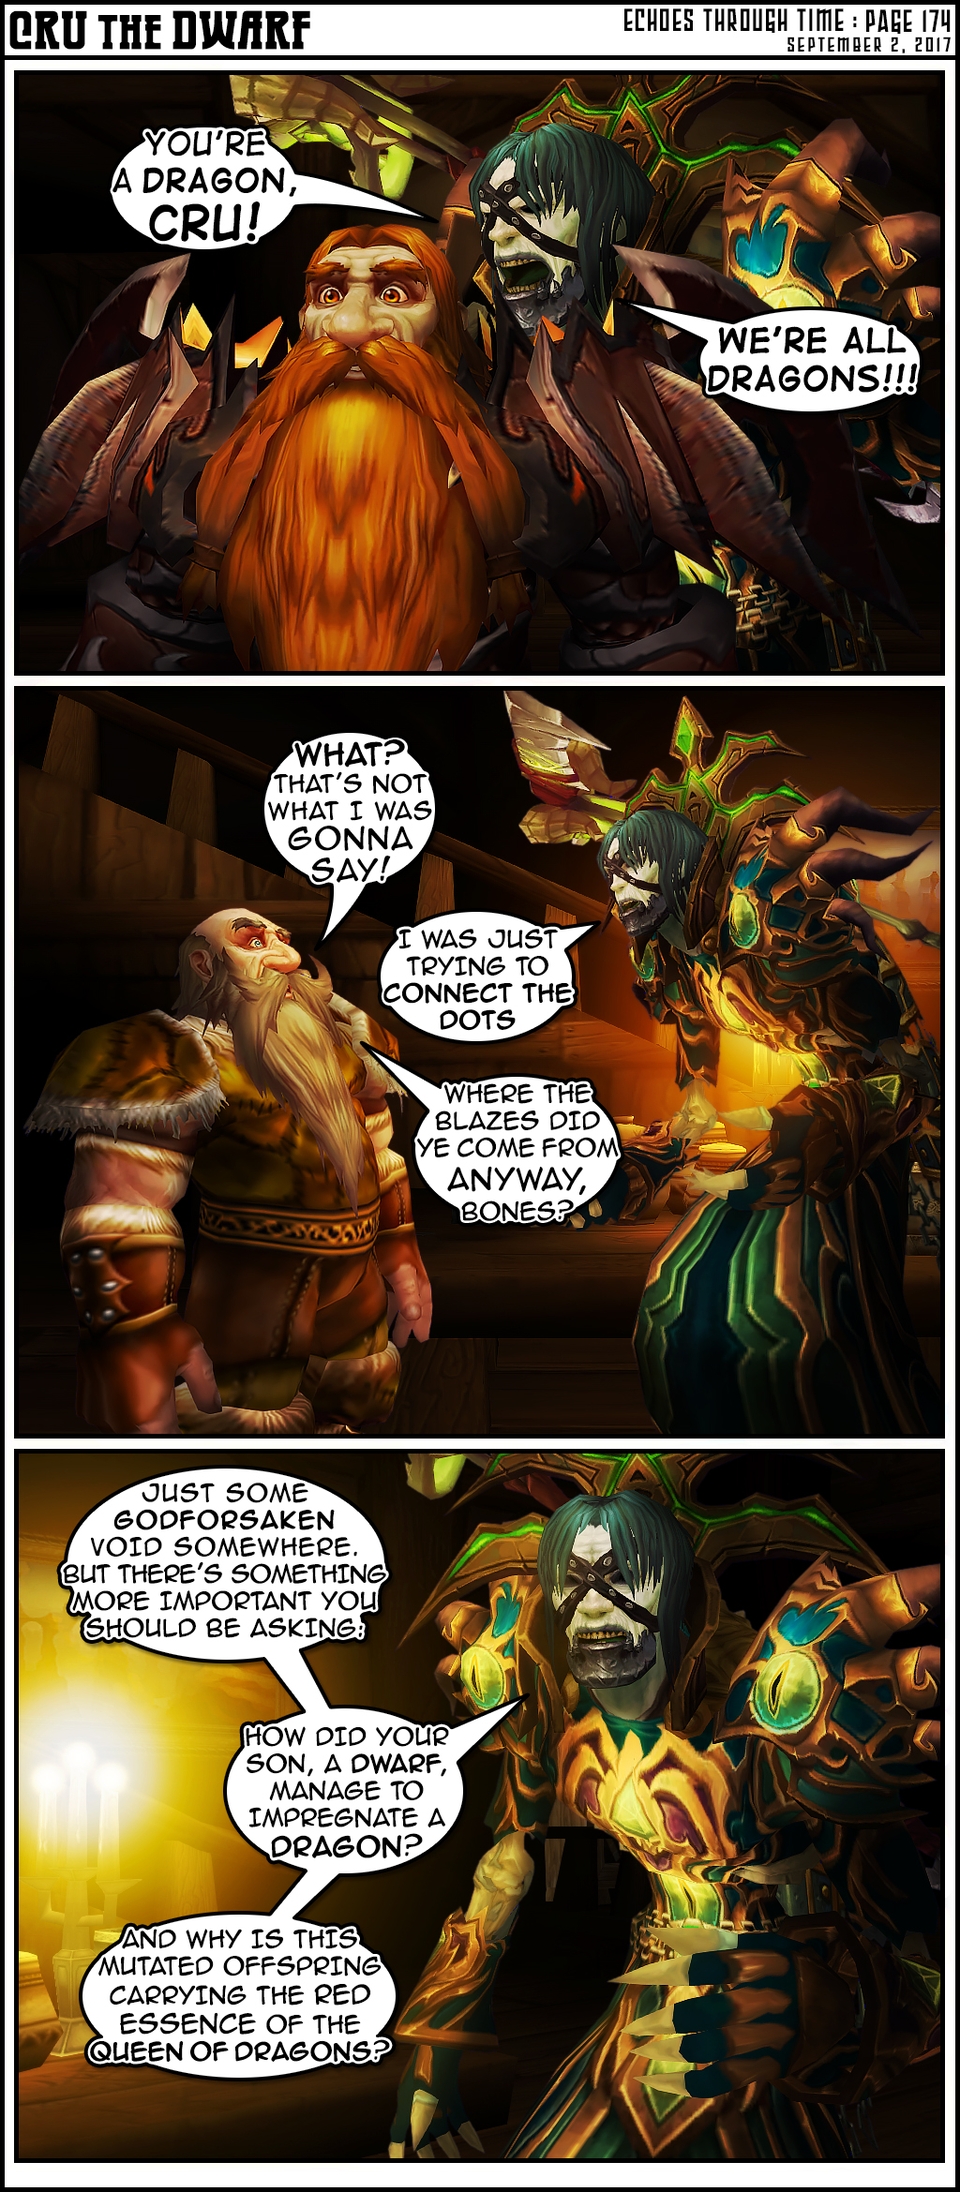 Echoes Through Time - Pg 174 “We're All Dragons”